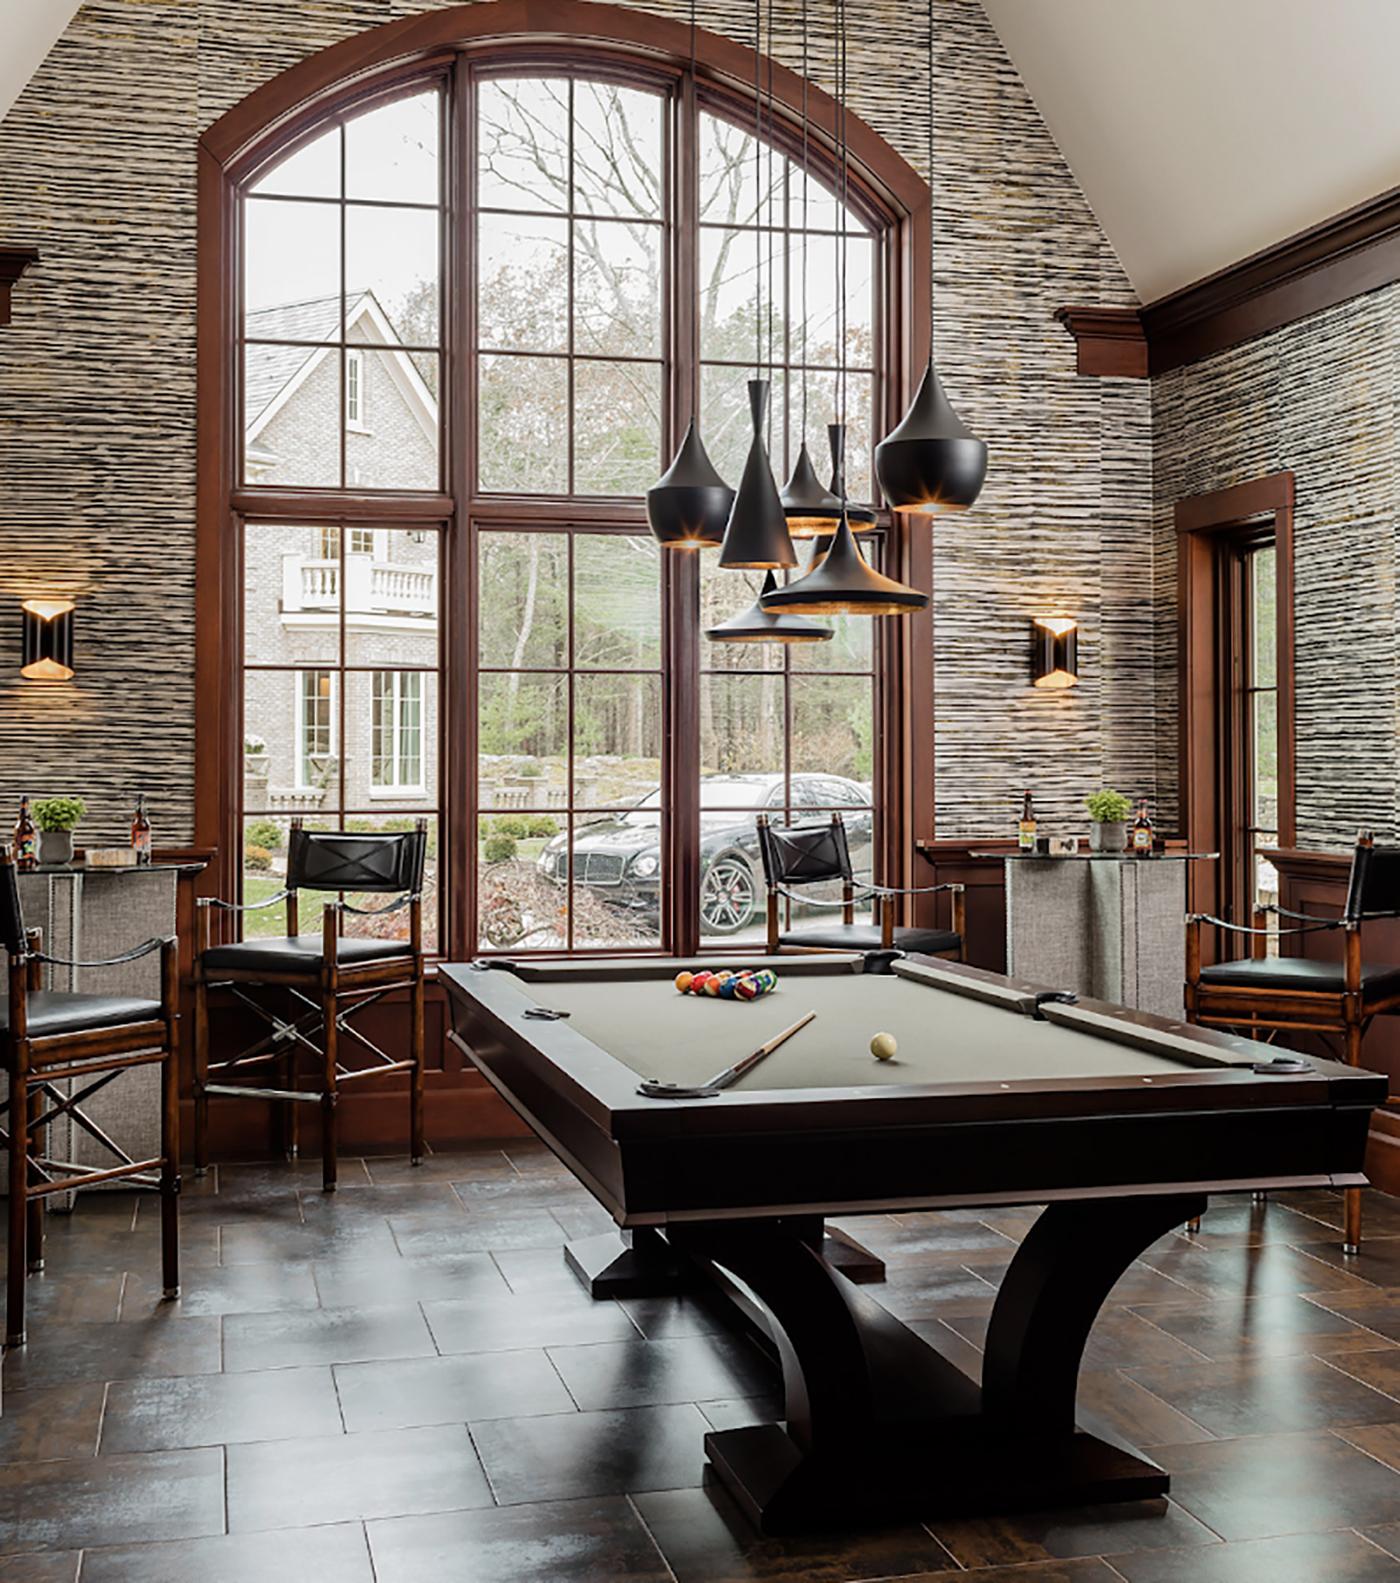 Ciche Home Pool Table - Betsy Bassett Interiors; Michael J. Lee Photography